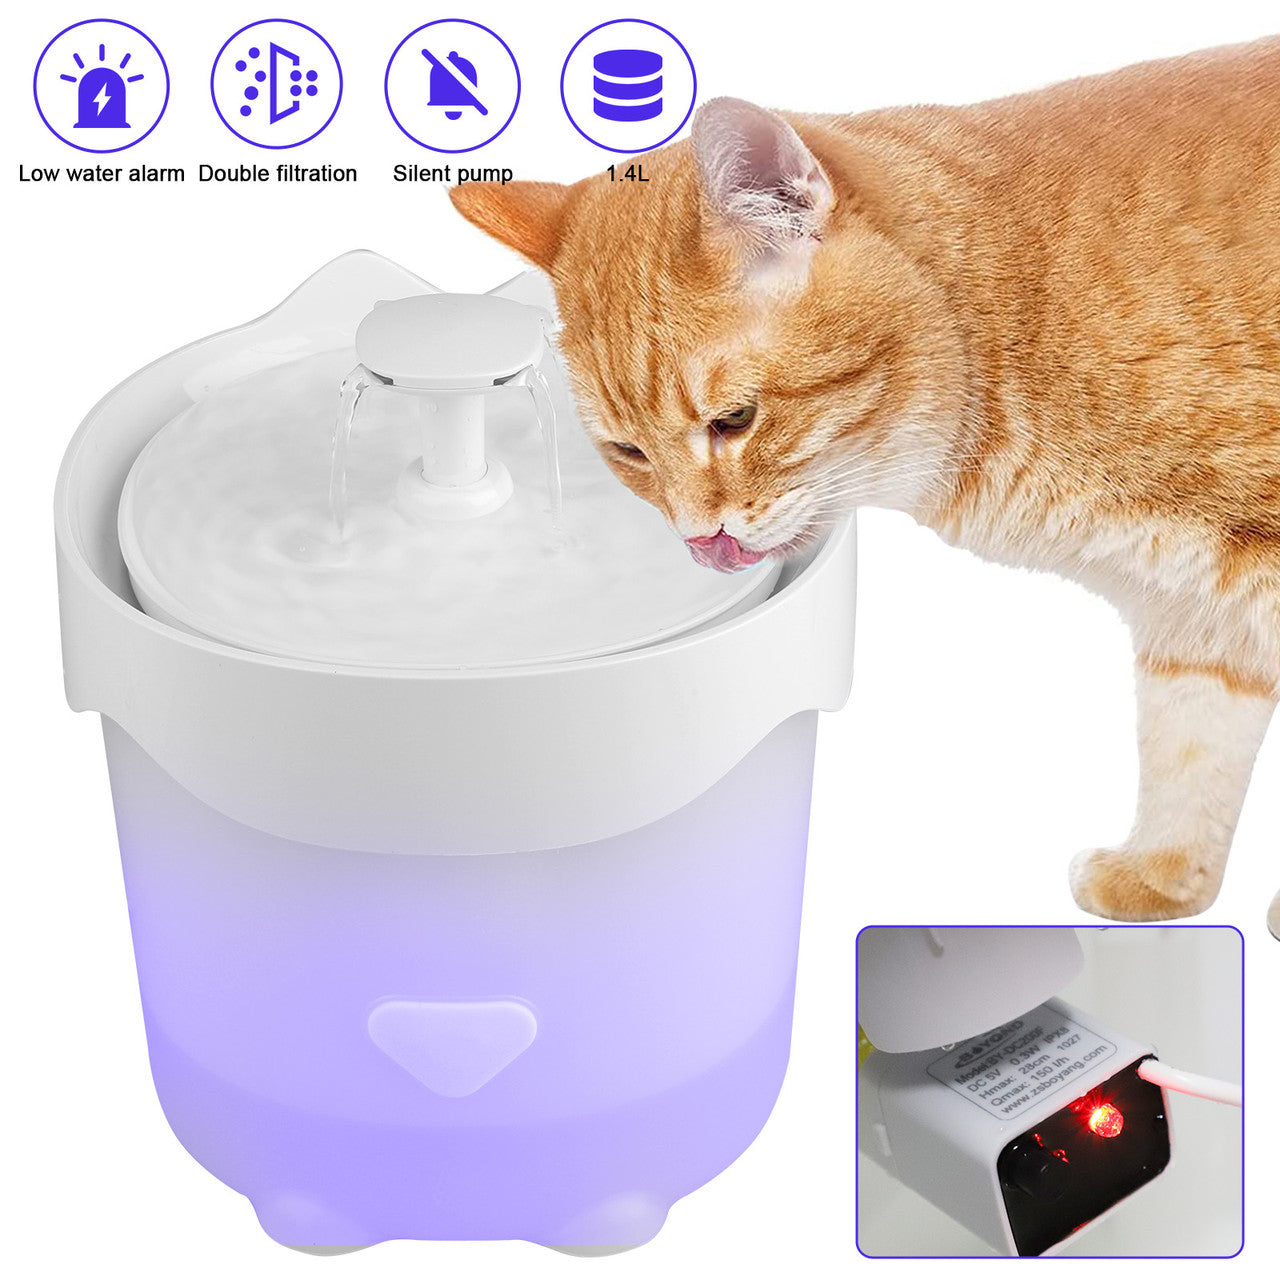 Smart Dog Water Bowl Dispenser With 1.4L Container, Filter and LED Indicator, For Kittens Cats Dogs